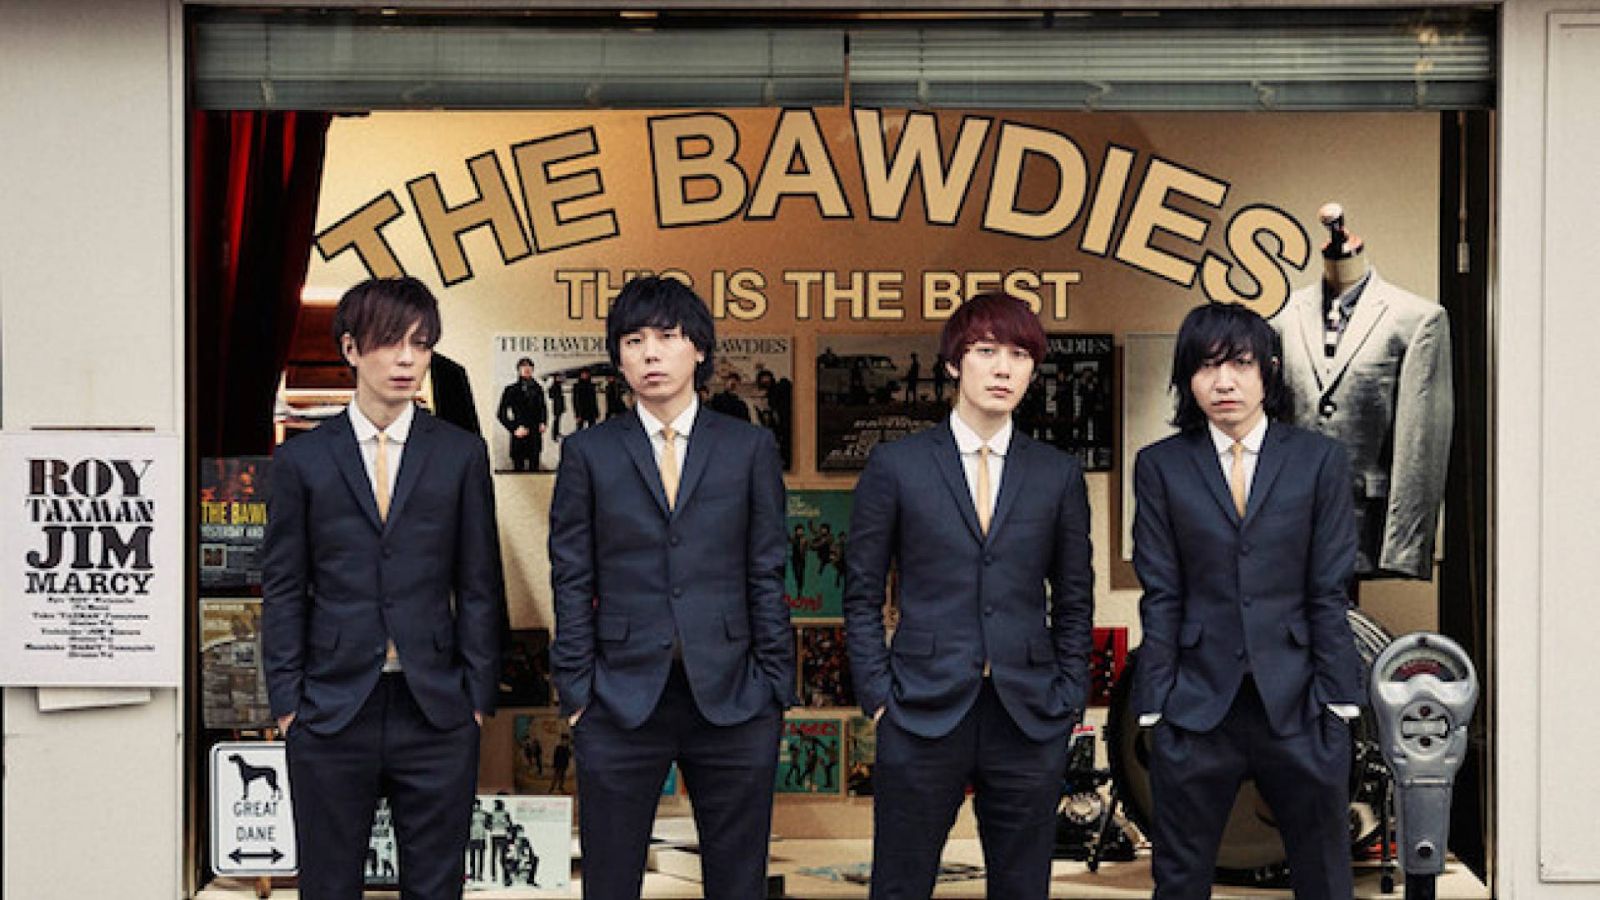 THE BAWDIES © THE BAWDIES